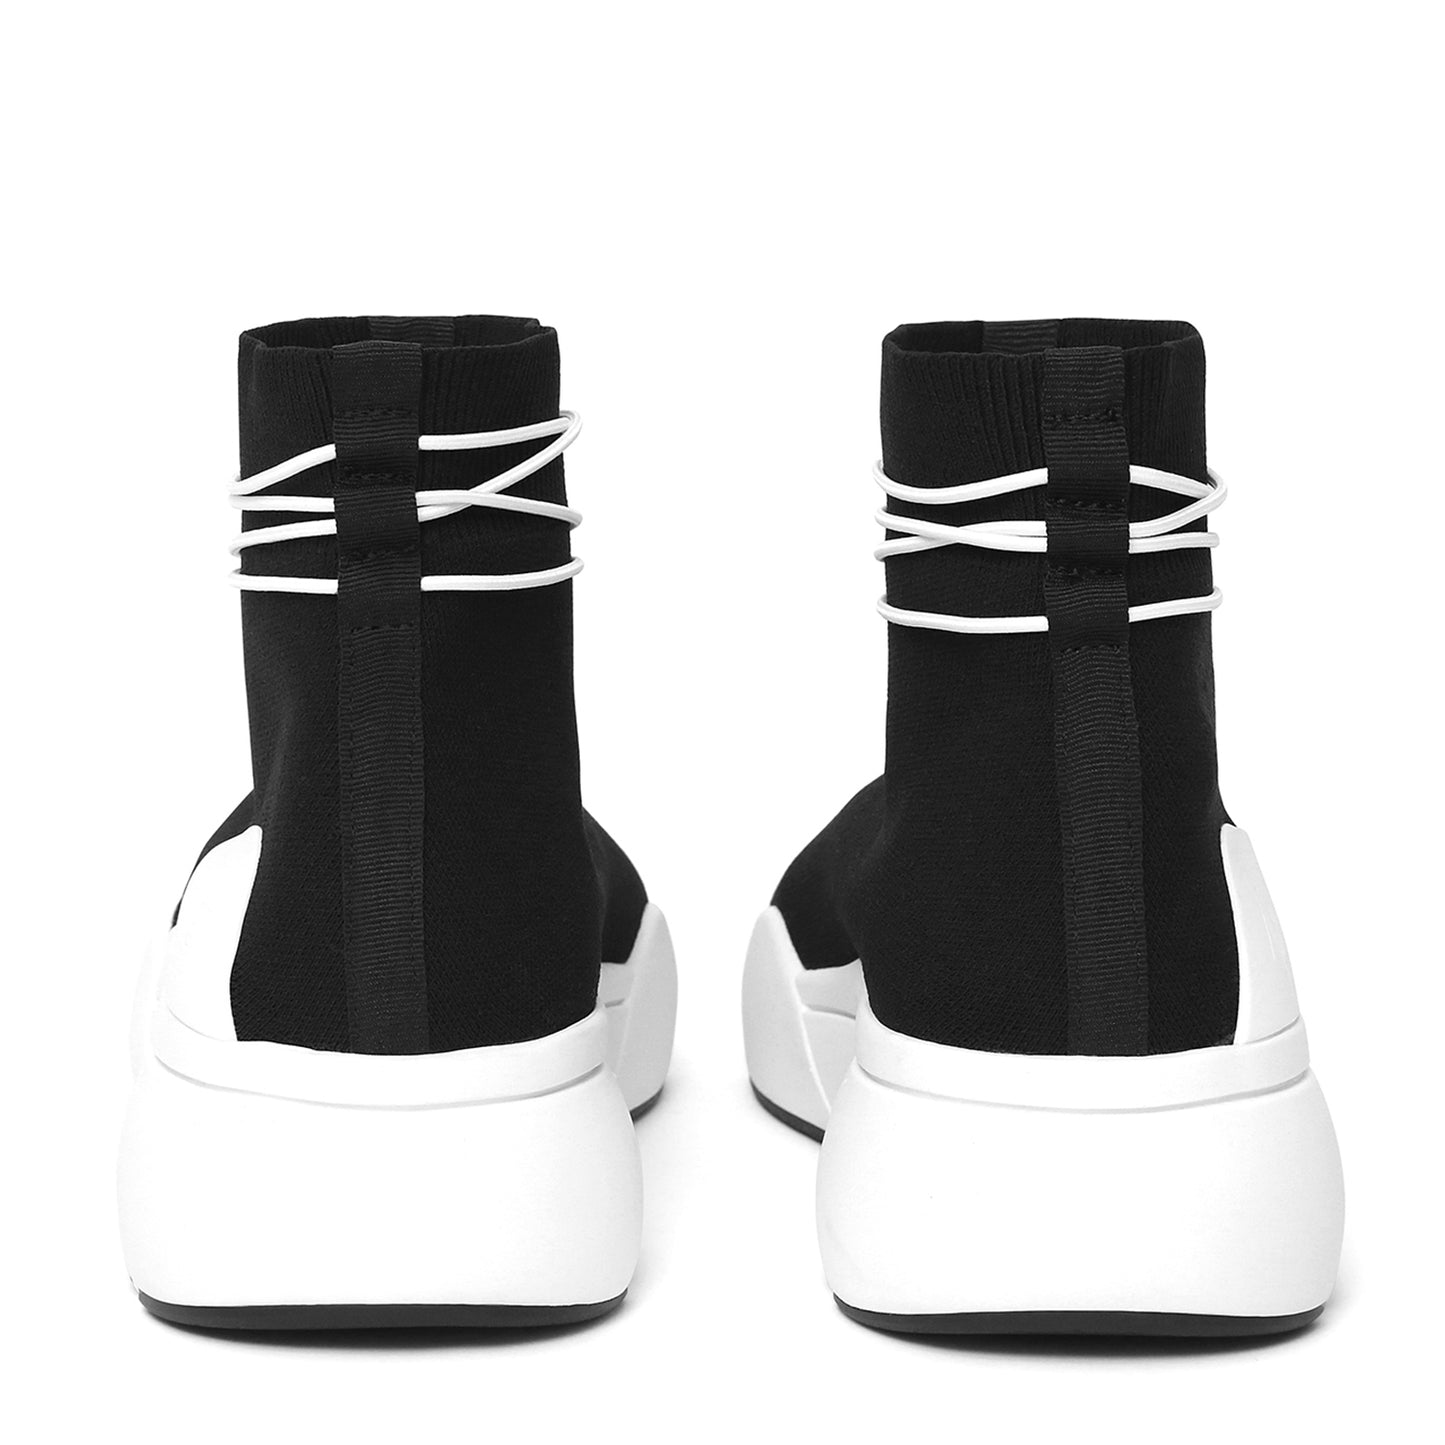 ELLIPSIS GYM SOCK TRAINER IN BLACK AND WHITE